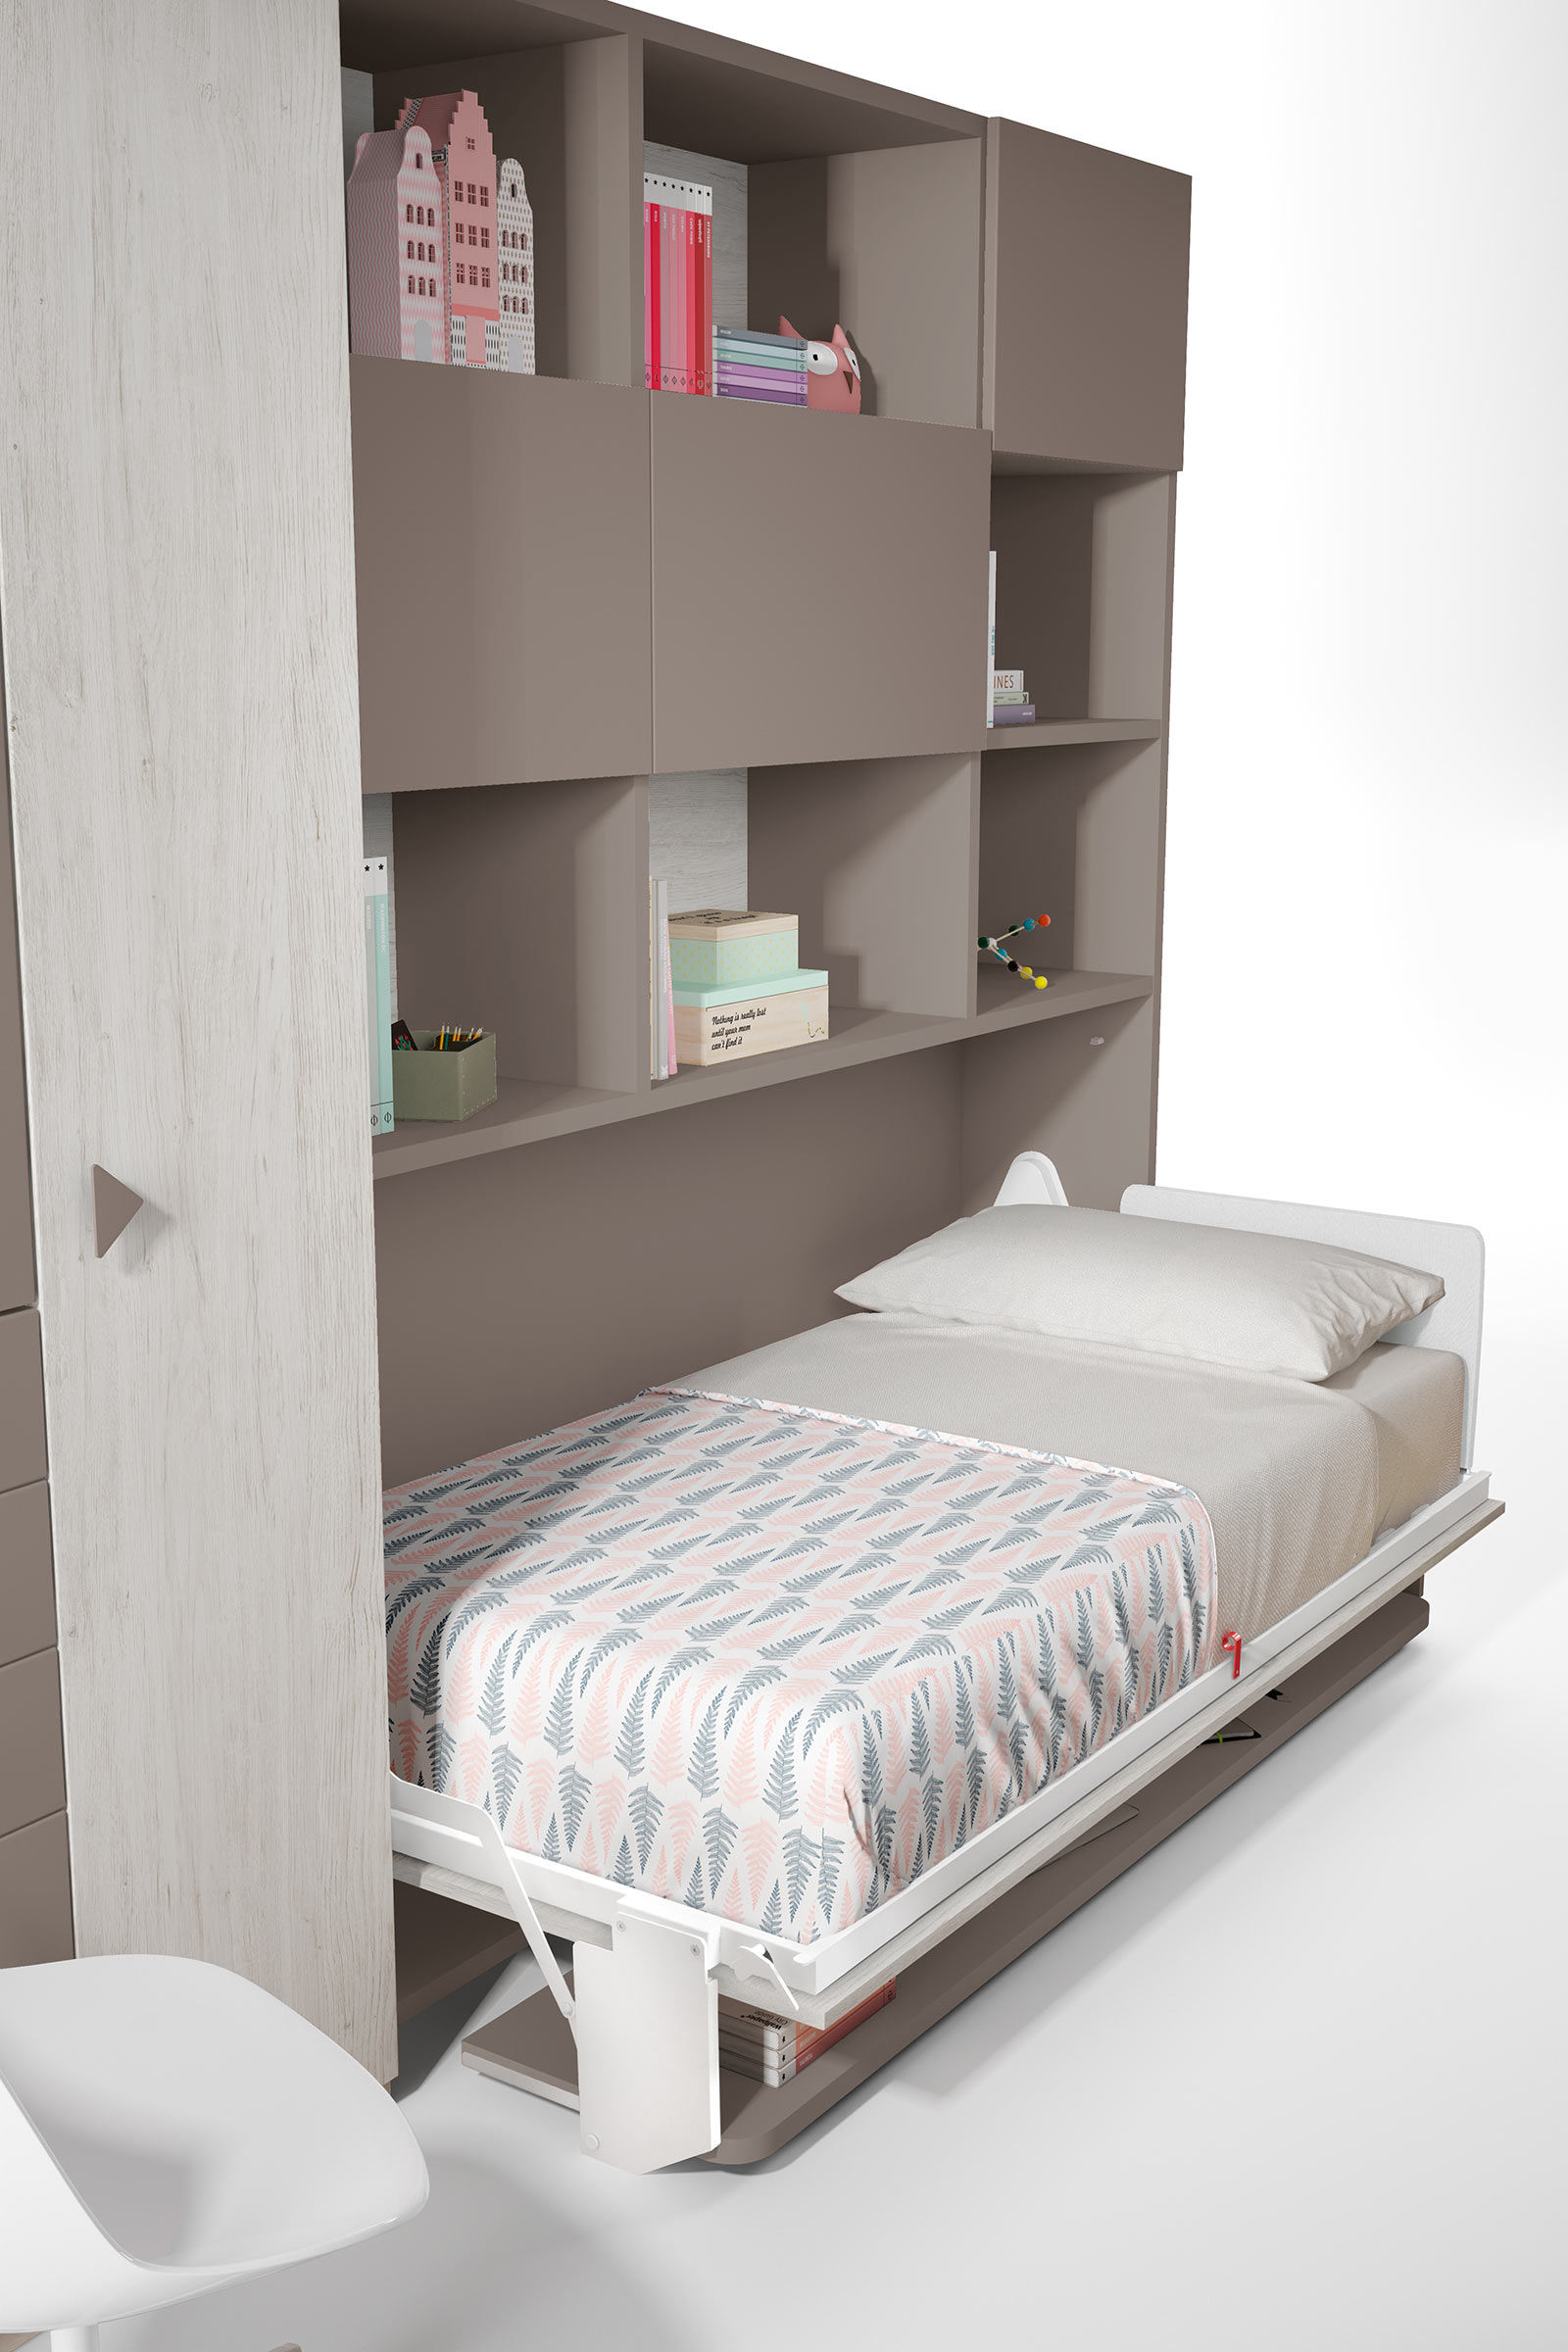 Space Deskbed The London Wallbed Company, Flip Up Desk Bed